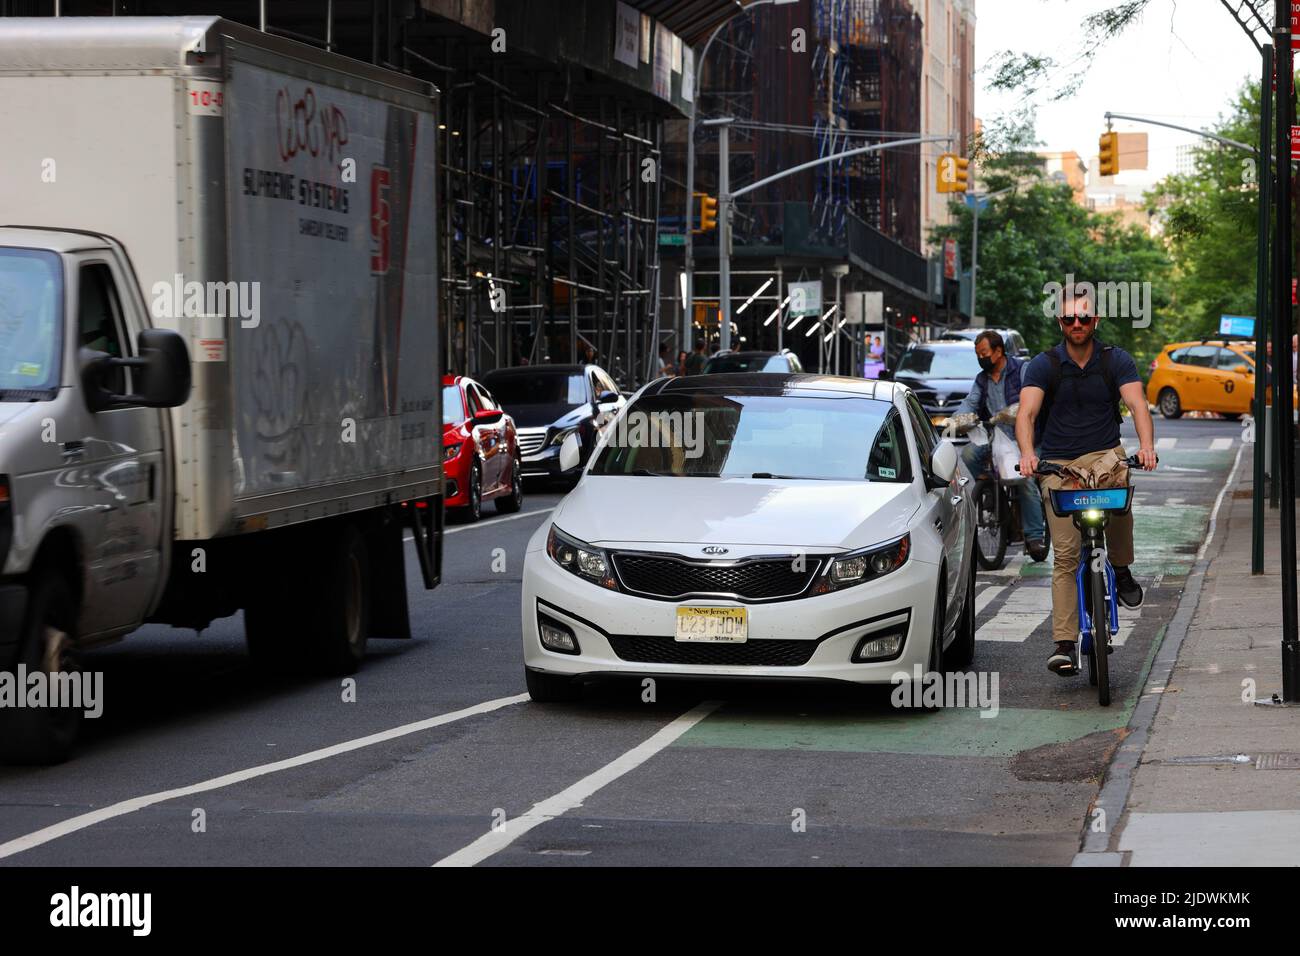 An illegally parked car blocking a bike lane in New York City. car blocking a bicycle lane in Manhattan. June 20, 2022. Stock Photo